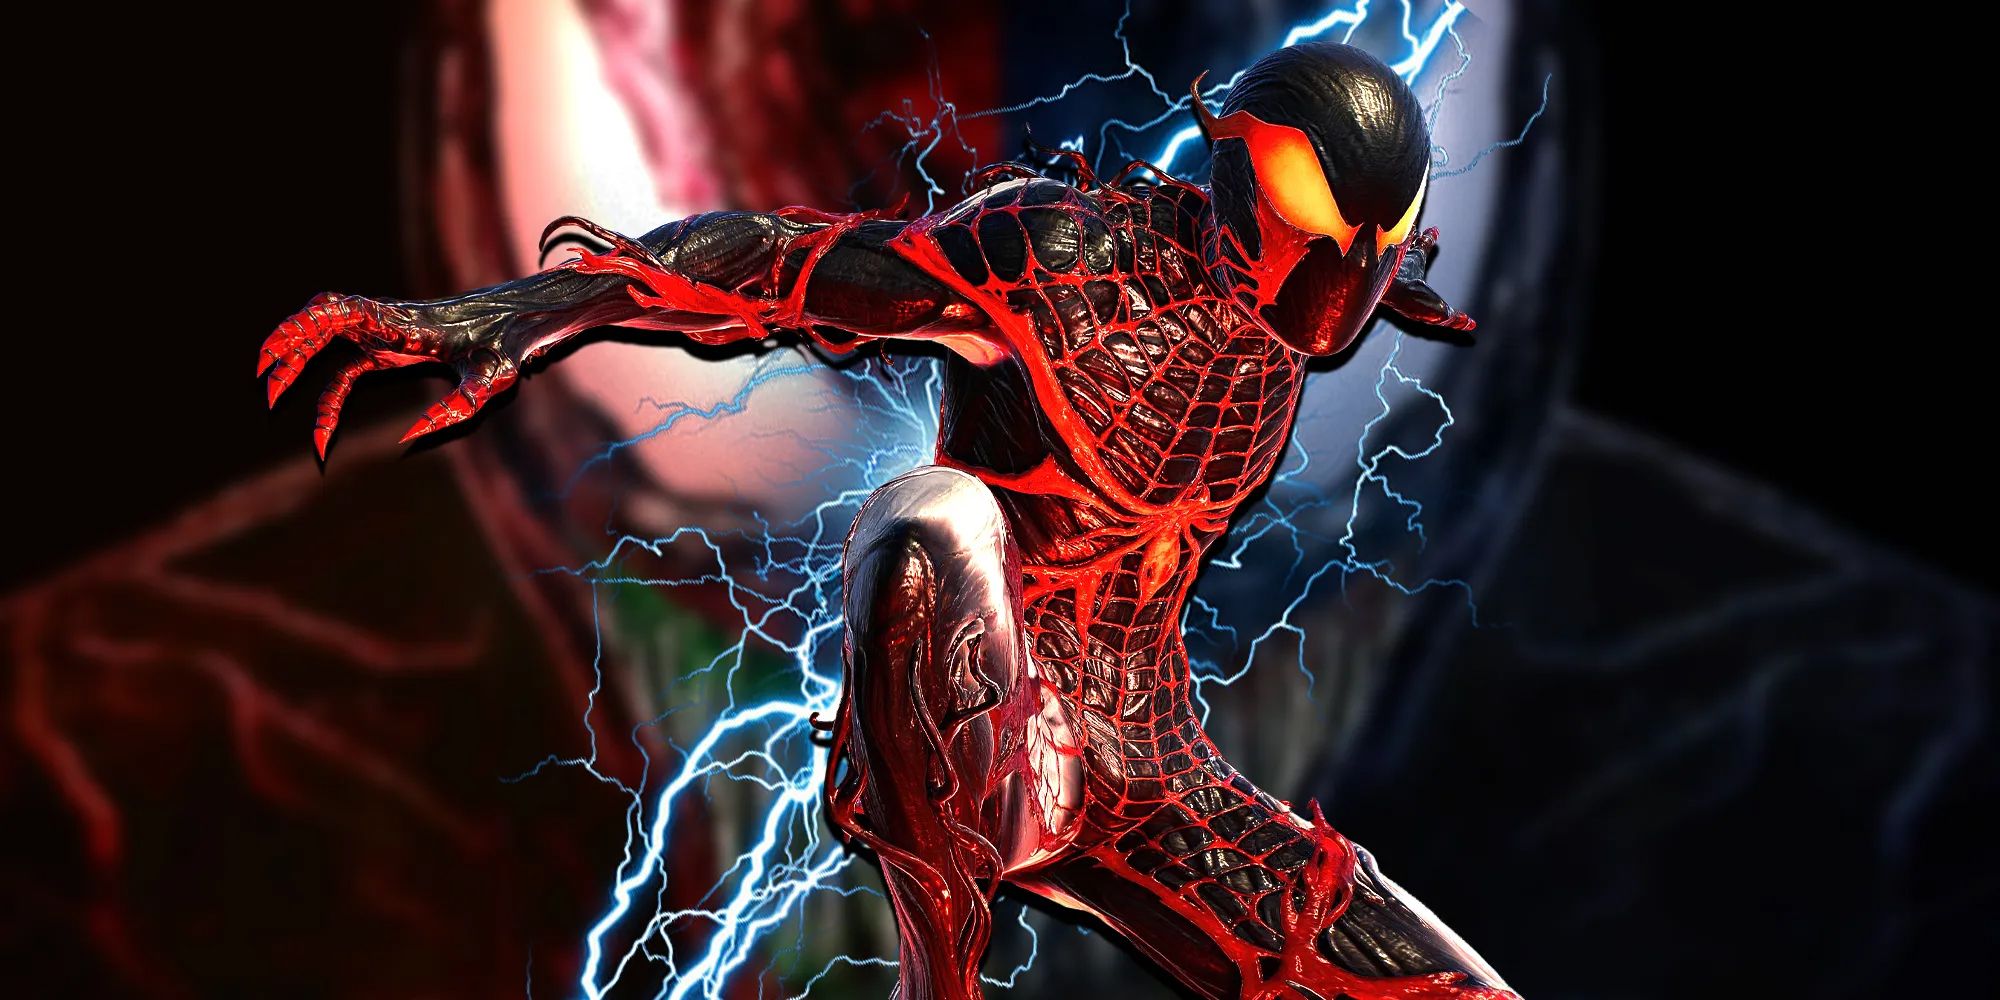 Miles Morales's Absolute Carnage suit in Marvel's Spider-Man 2